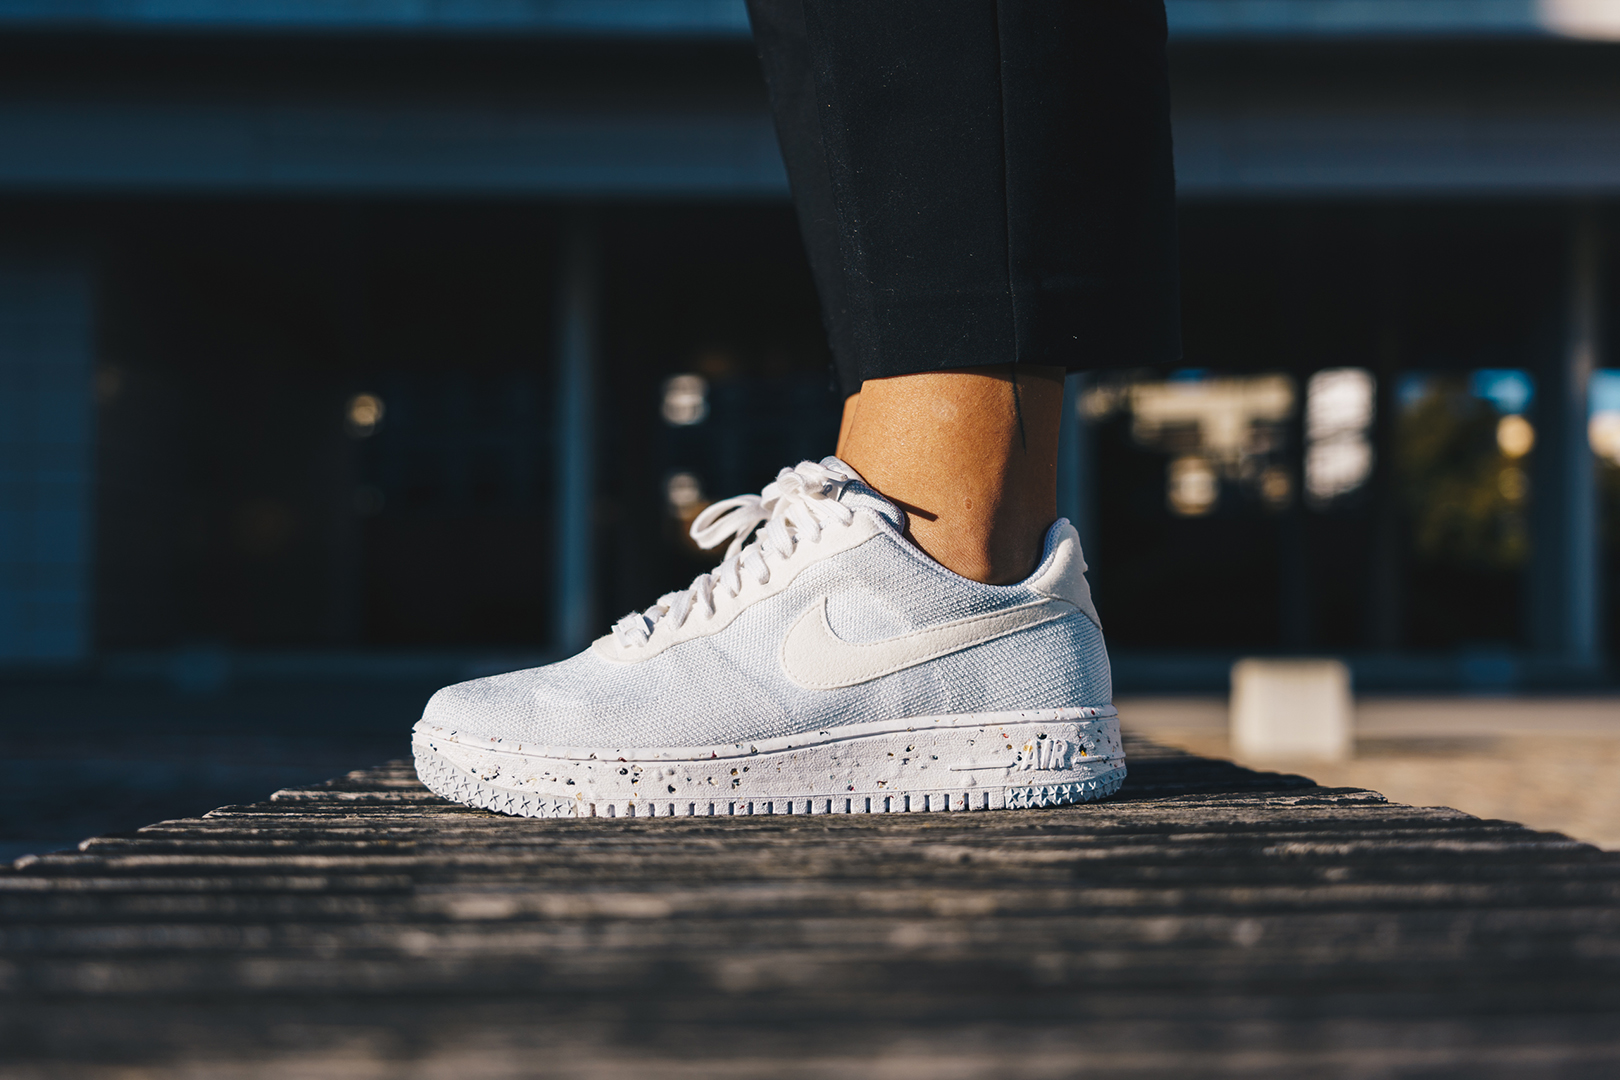 the af1 crater flyknit